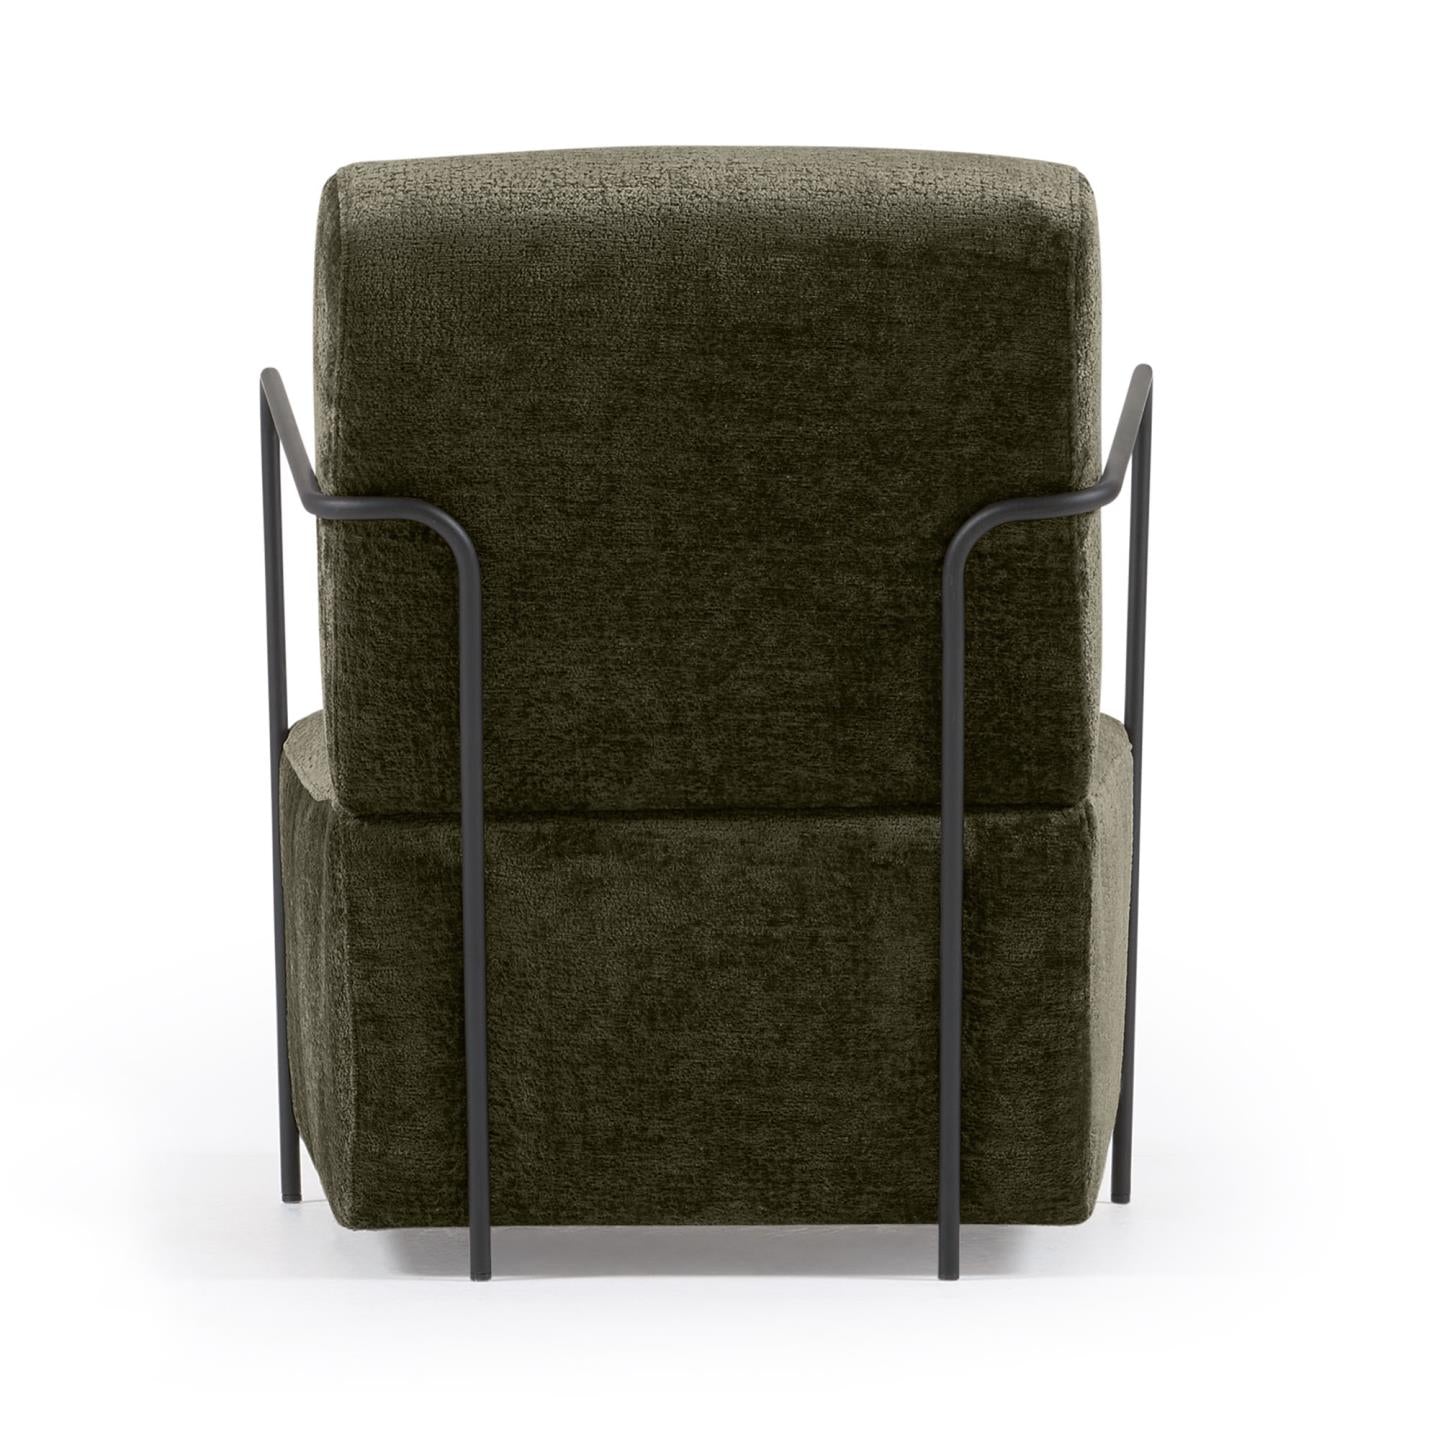 Kave Home Gamer fauteuil groen chenille